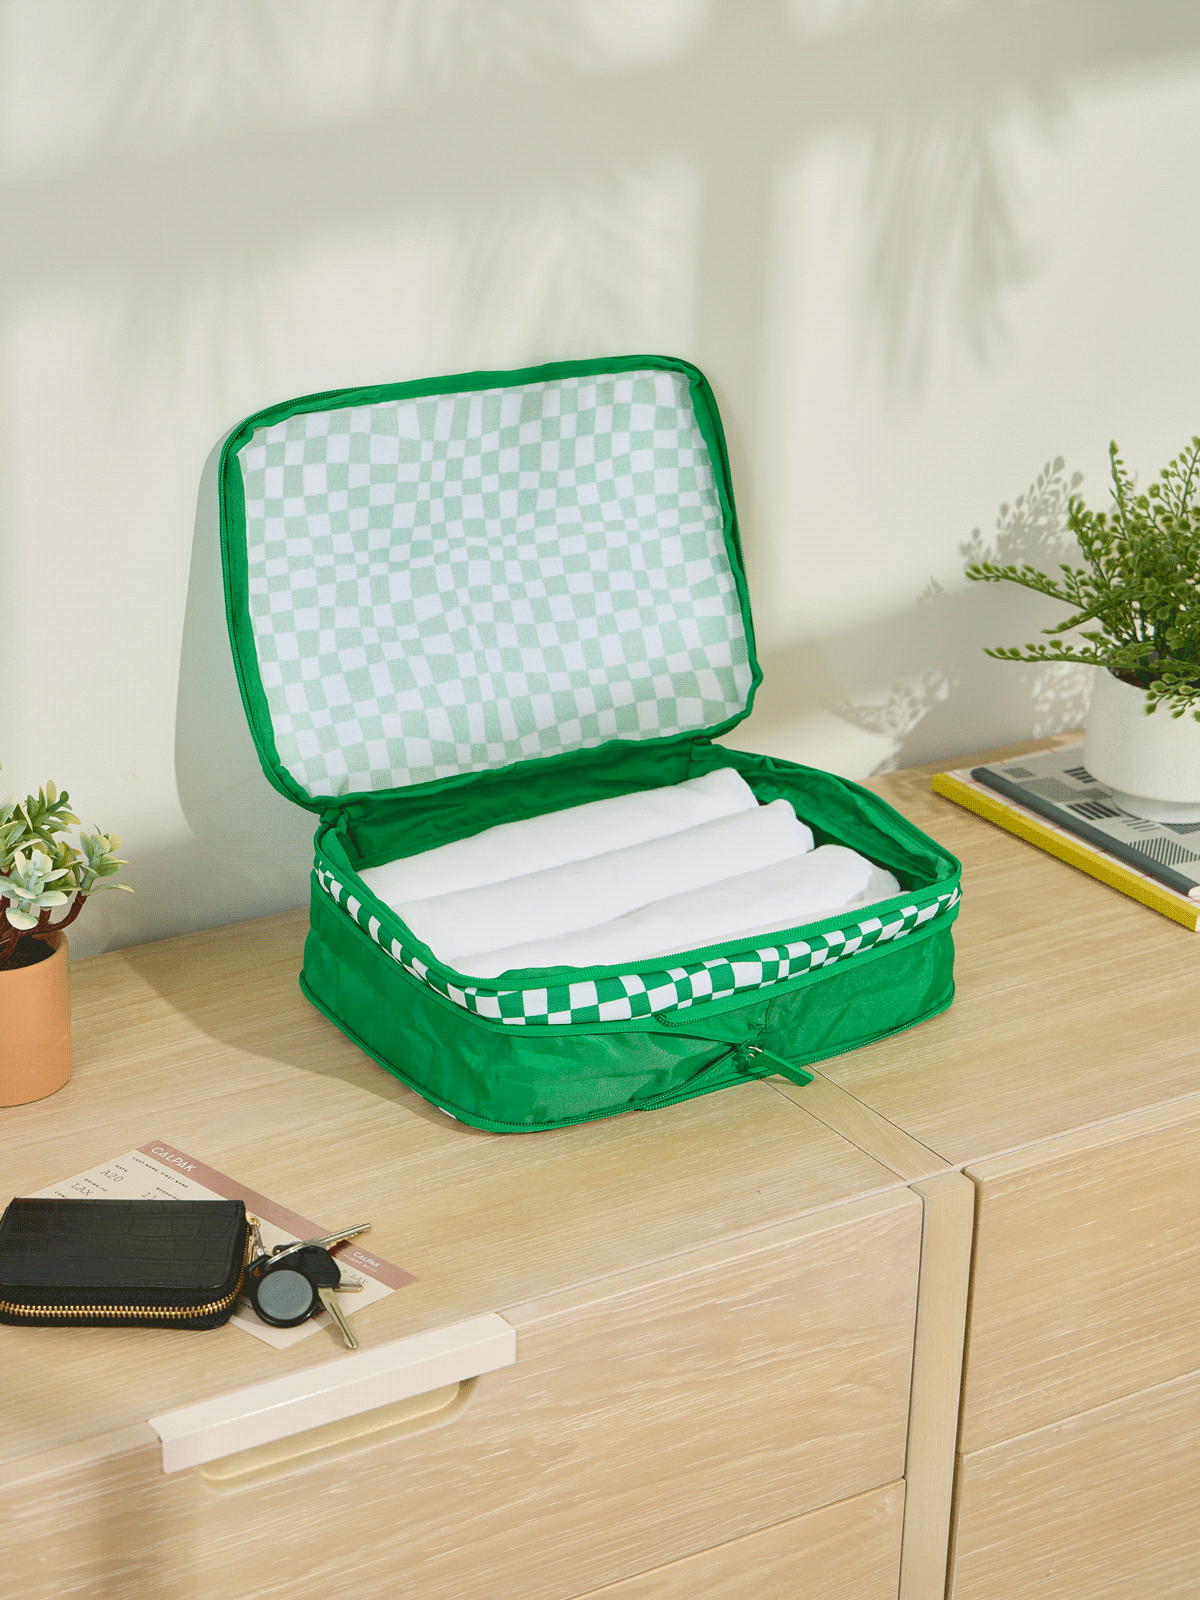 CALPAK Medium Compression Packing Cubes made of durable material and expandable by 4.5" in green checkerboard